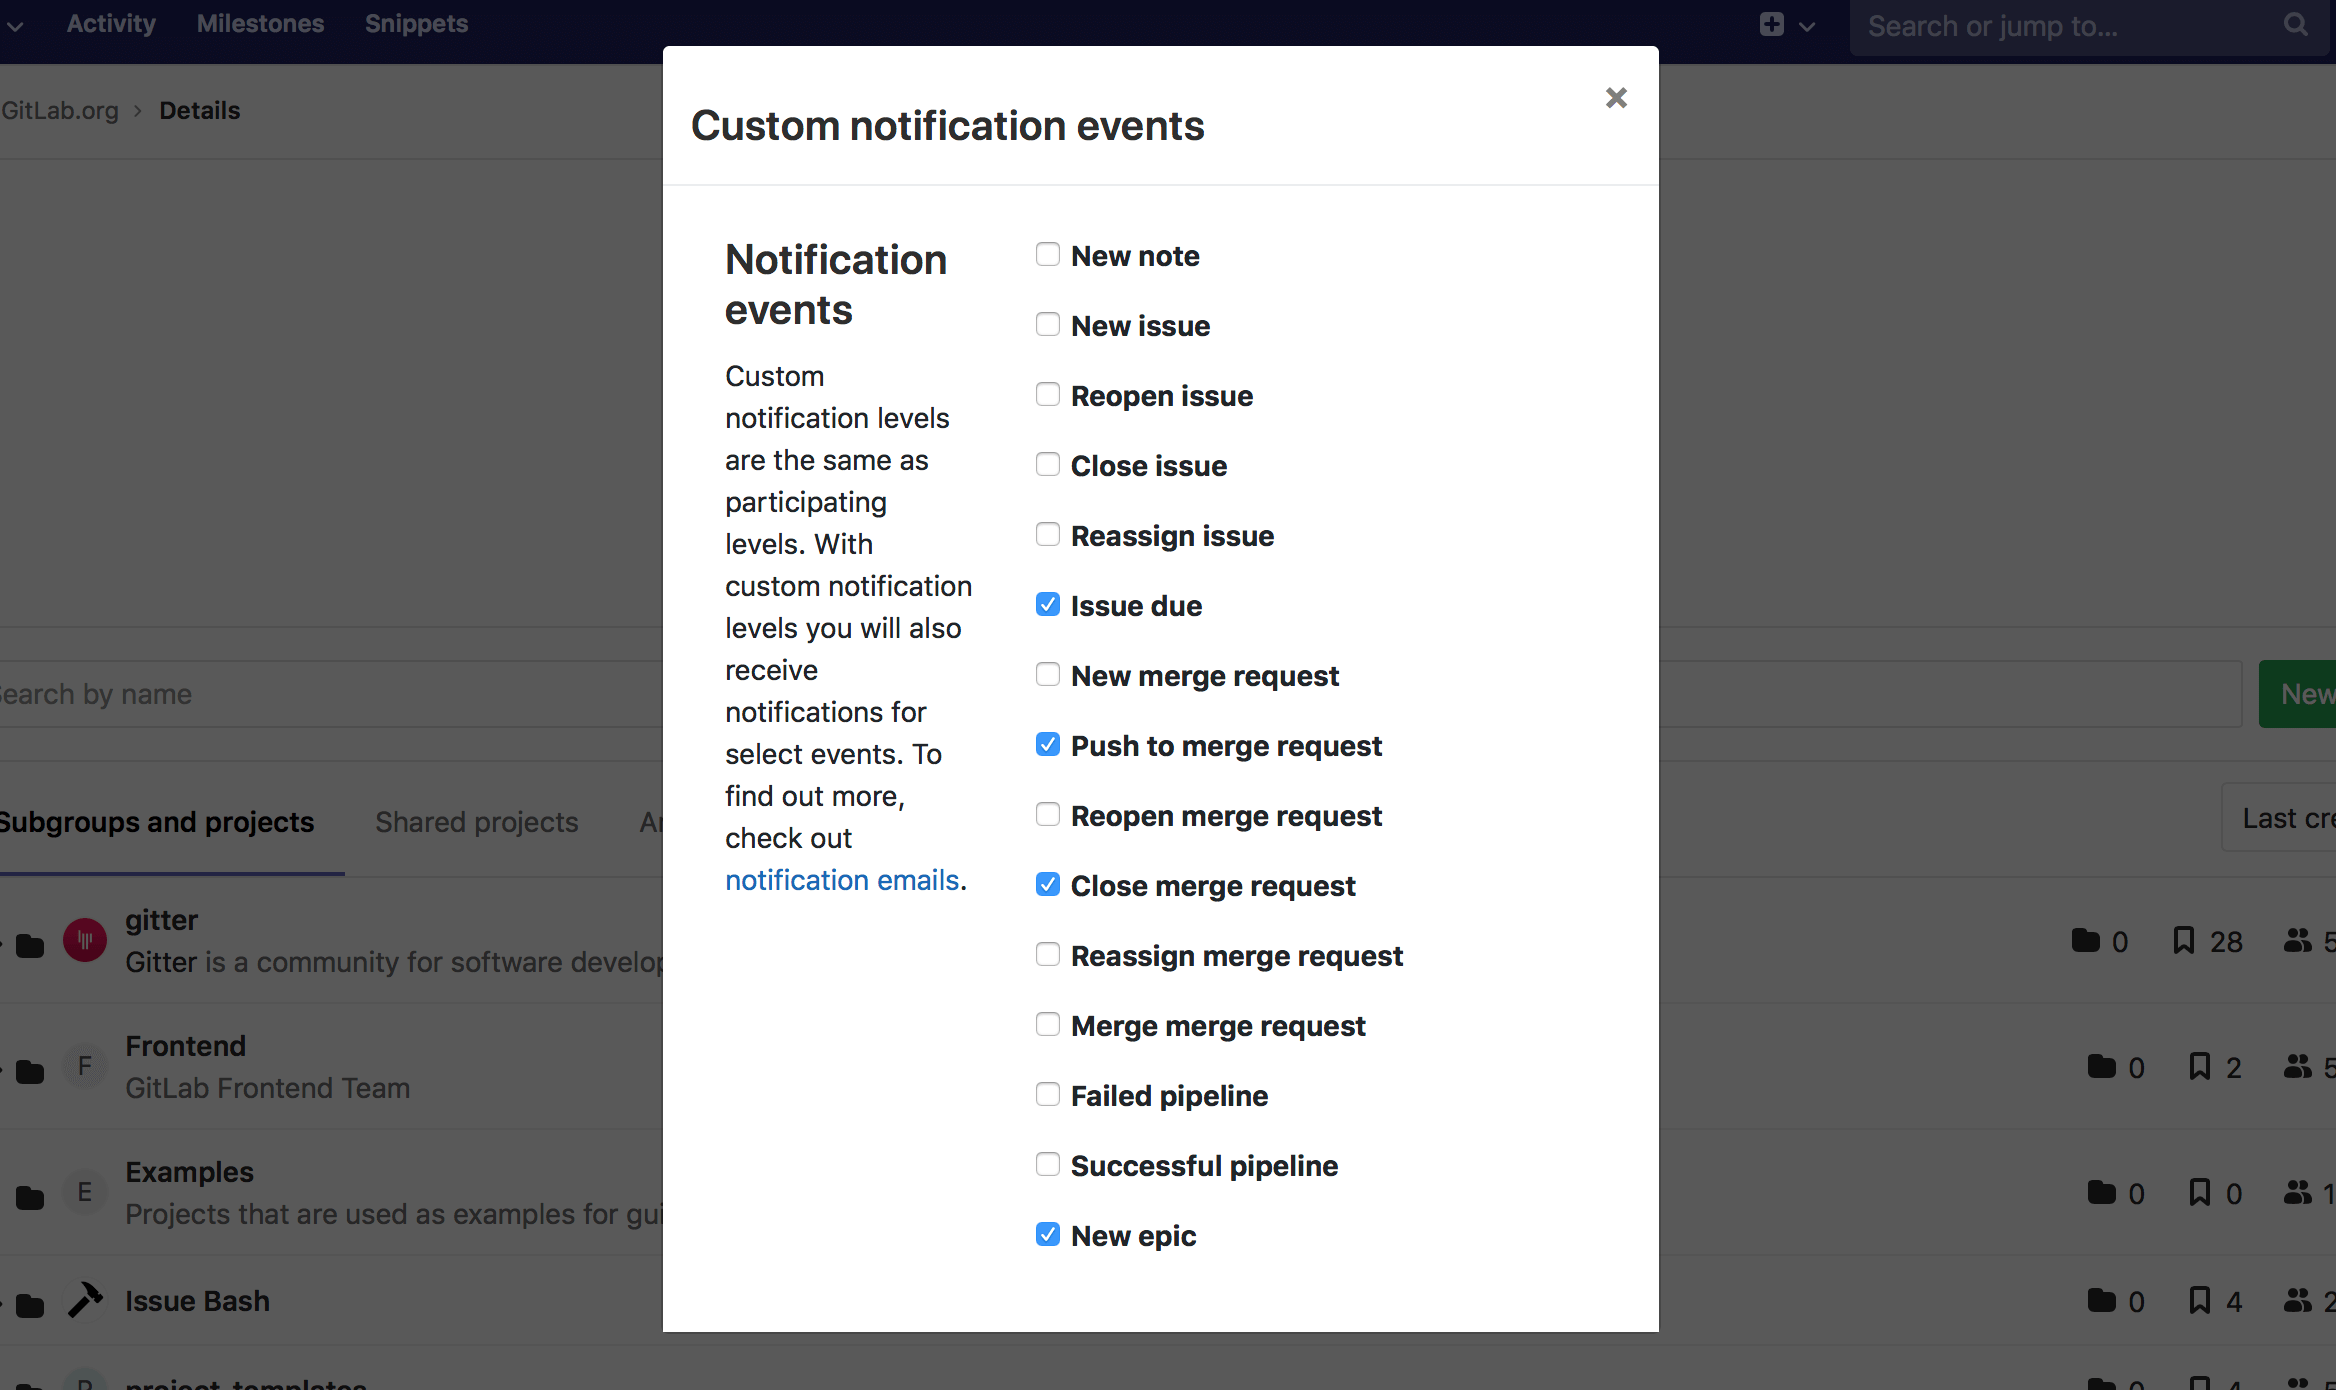 New epic event as custom notification